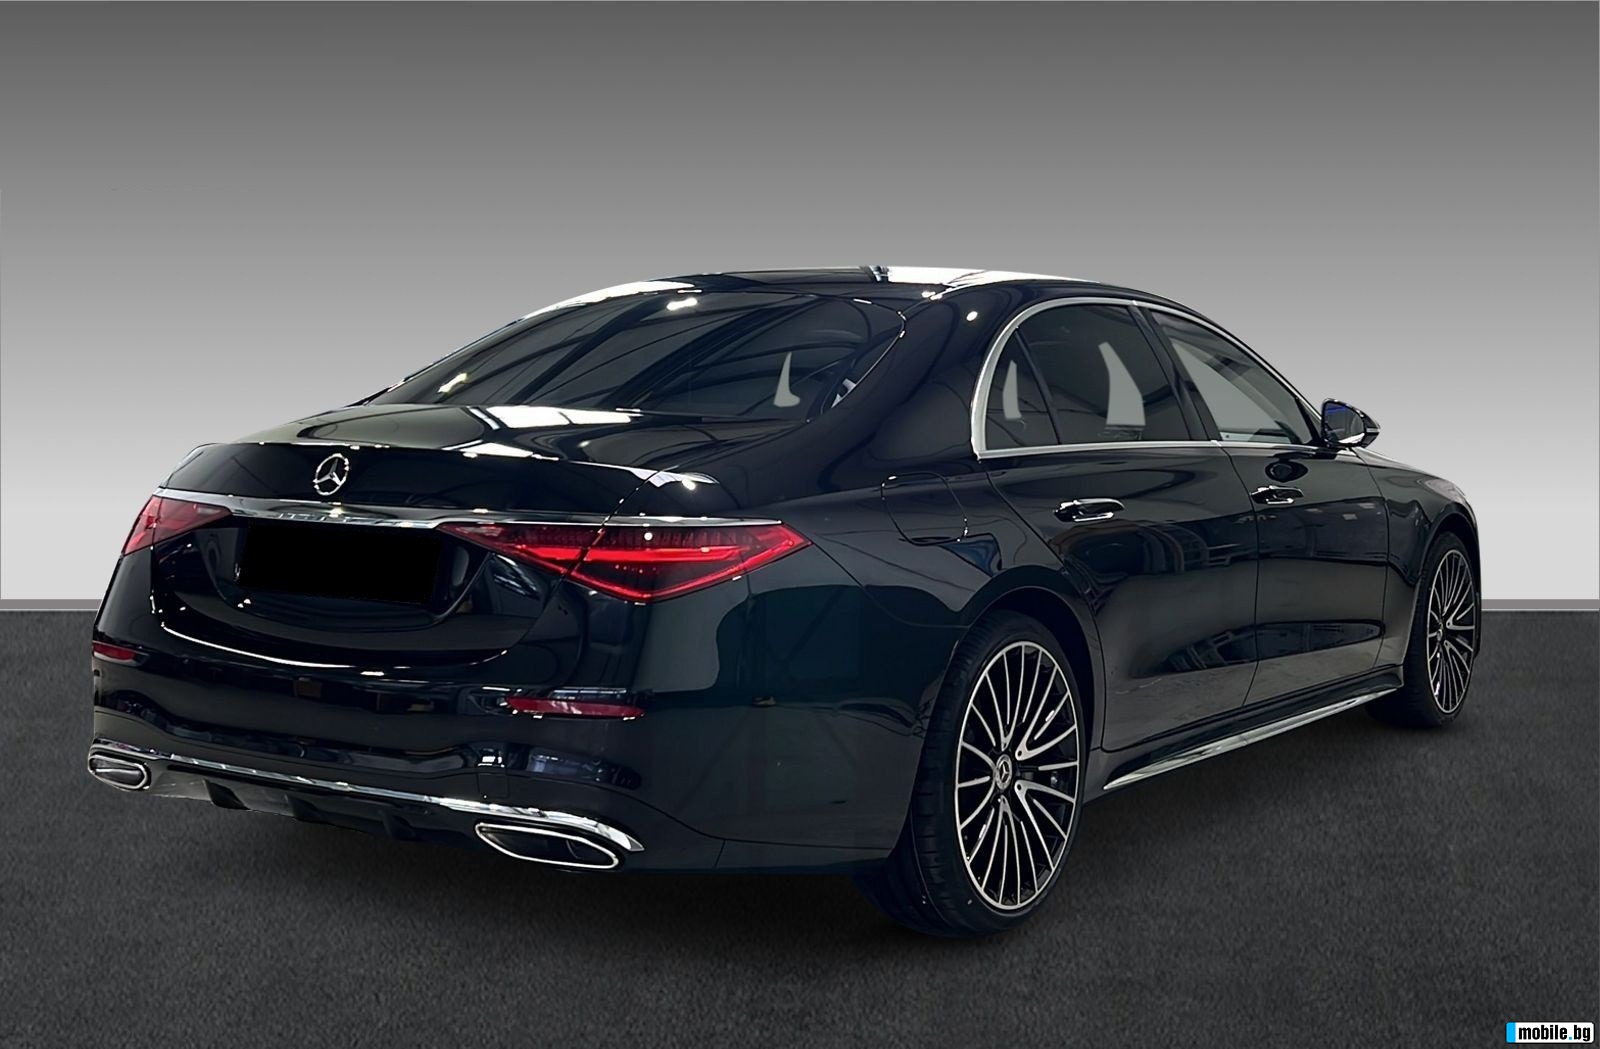 Mercedes-Benz S580 Long 4Matic AMG Line =Exclusive= Panorama  | Mobile.bg   2